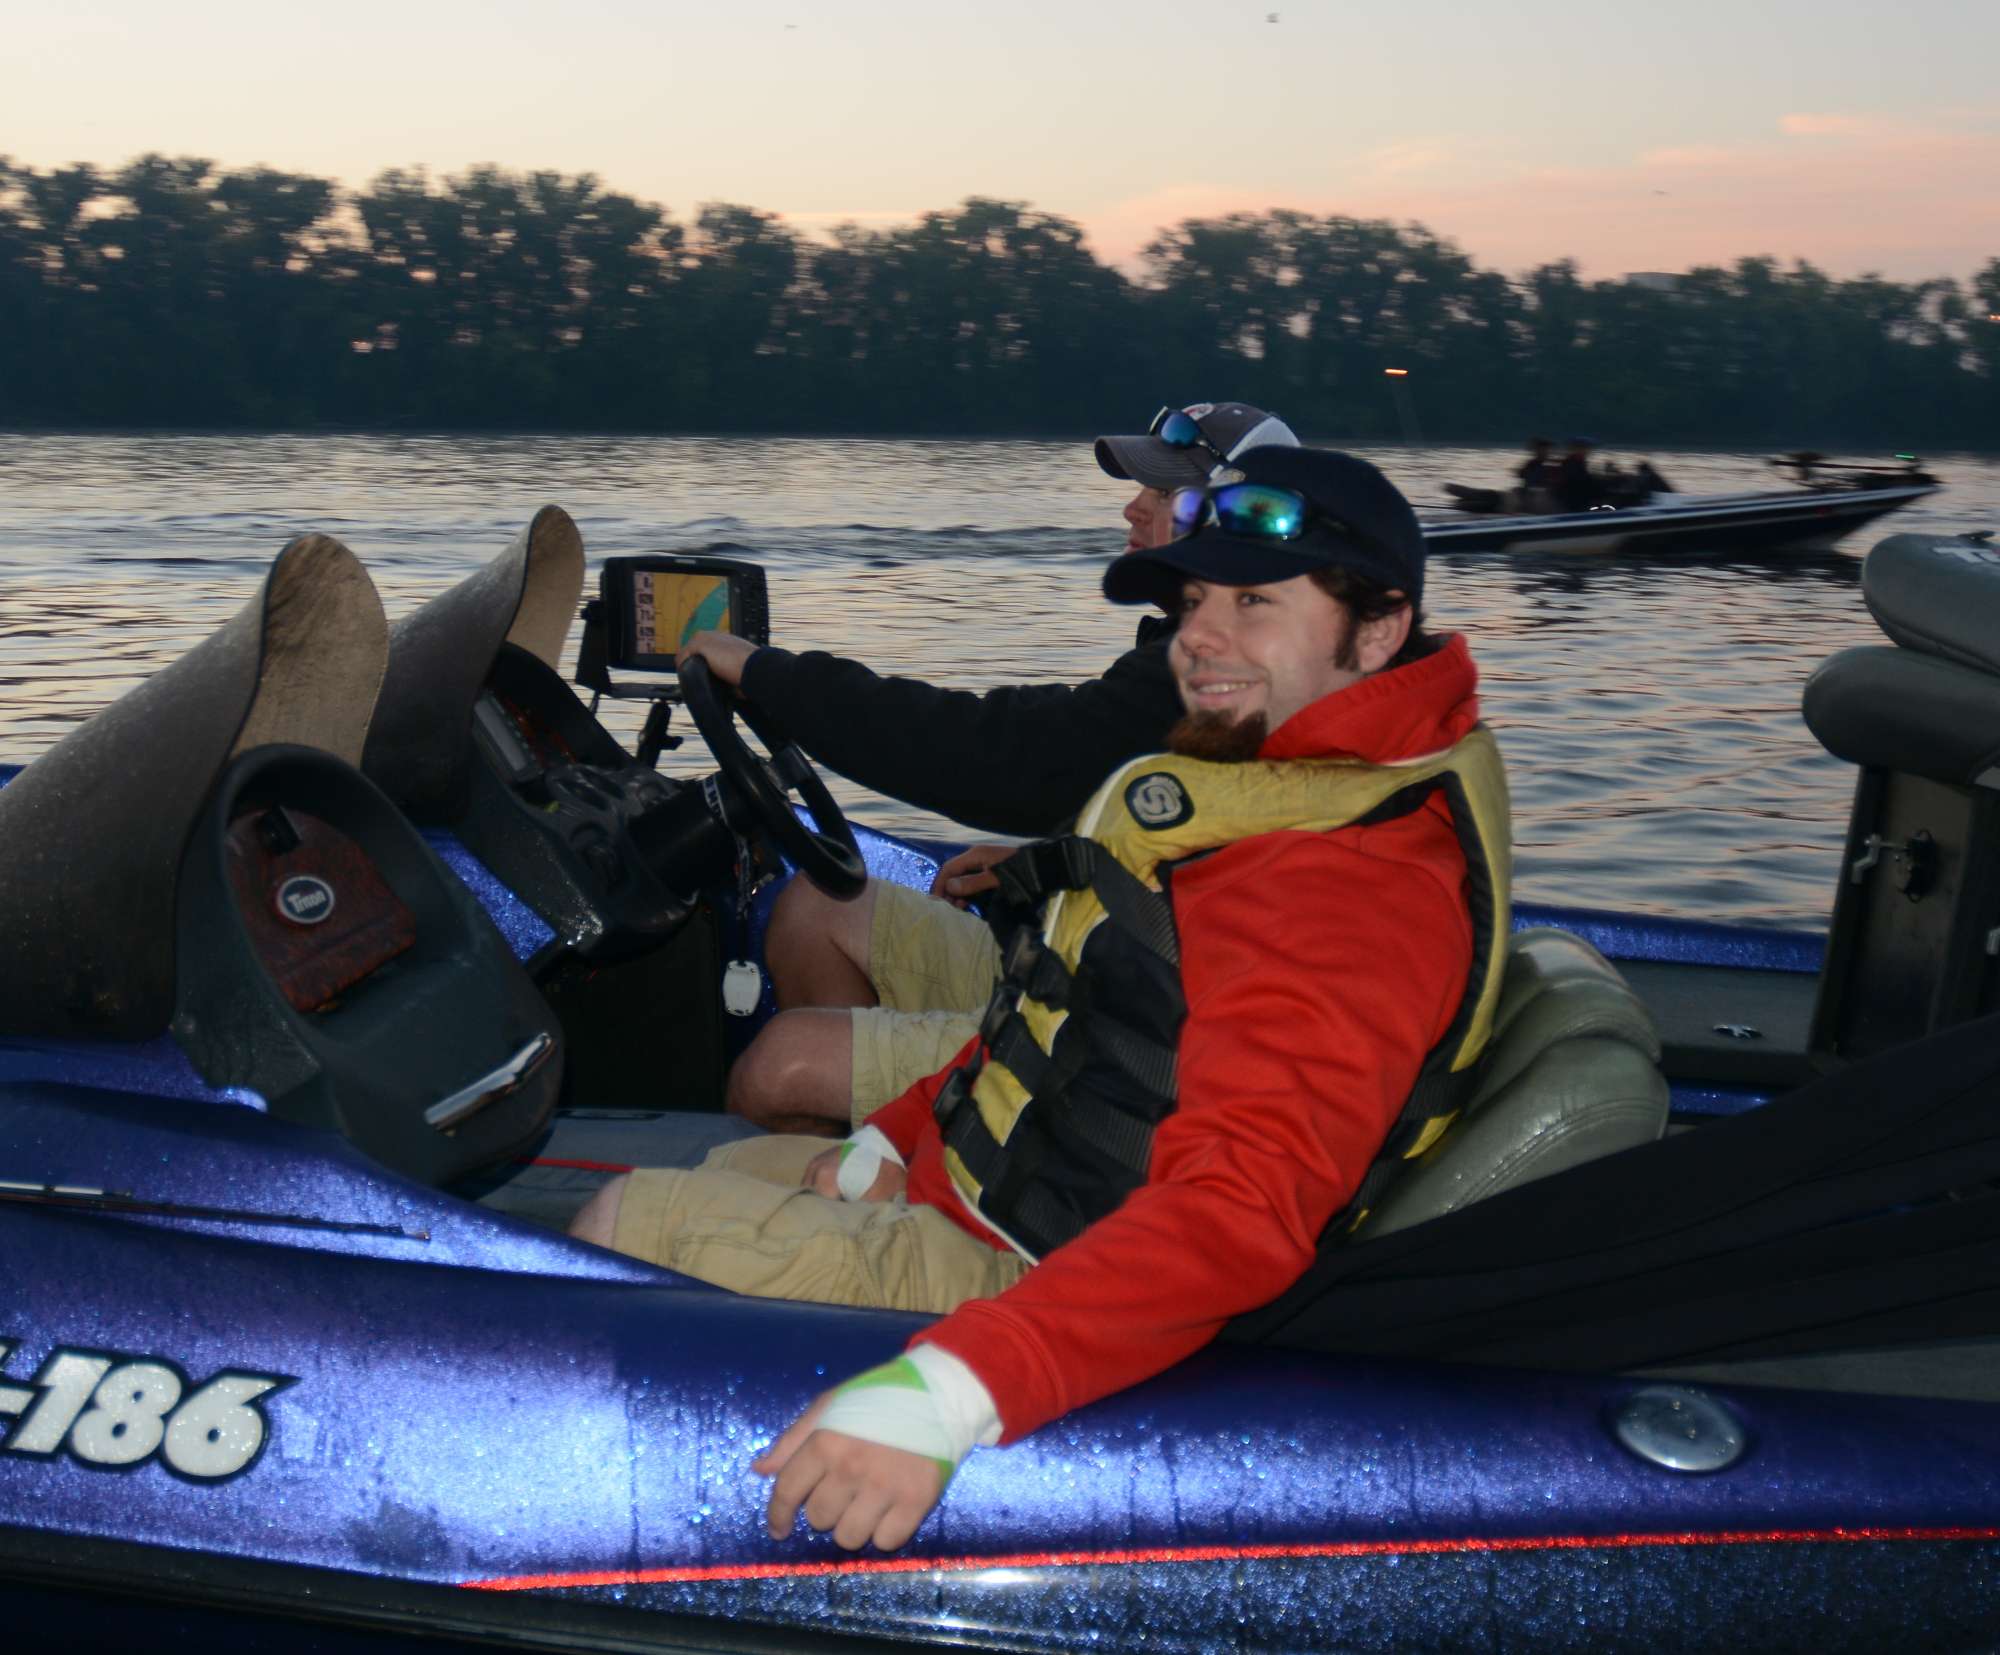 Michael Caudle of Massachusetts rides shotgun as he and Jason Kervin of Maine are the last anglers out.